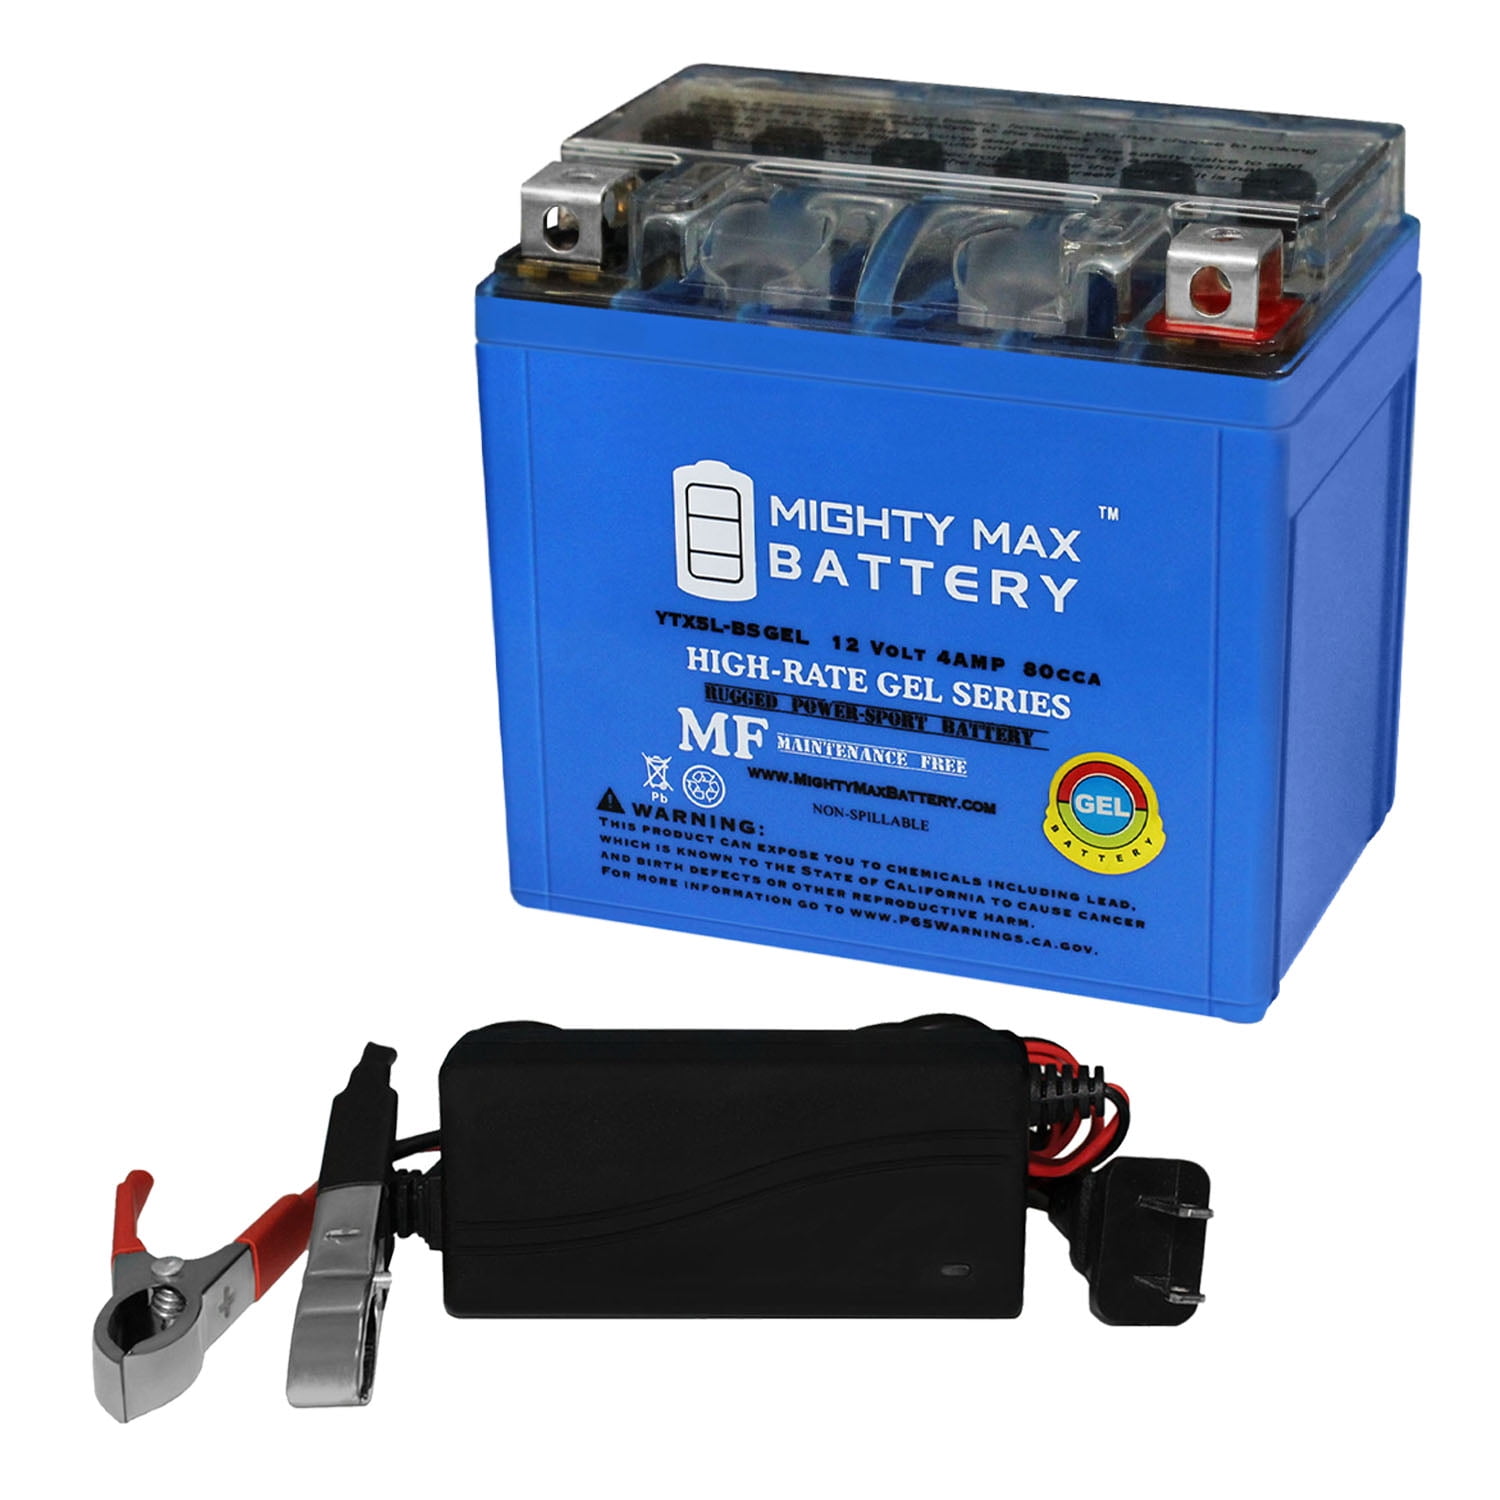 Mighty Max Battery 12V 18AH Gel Replacement Battery for FM12180 Brand Product 